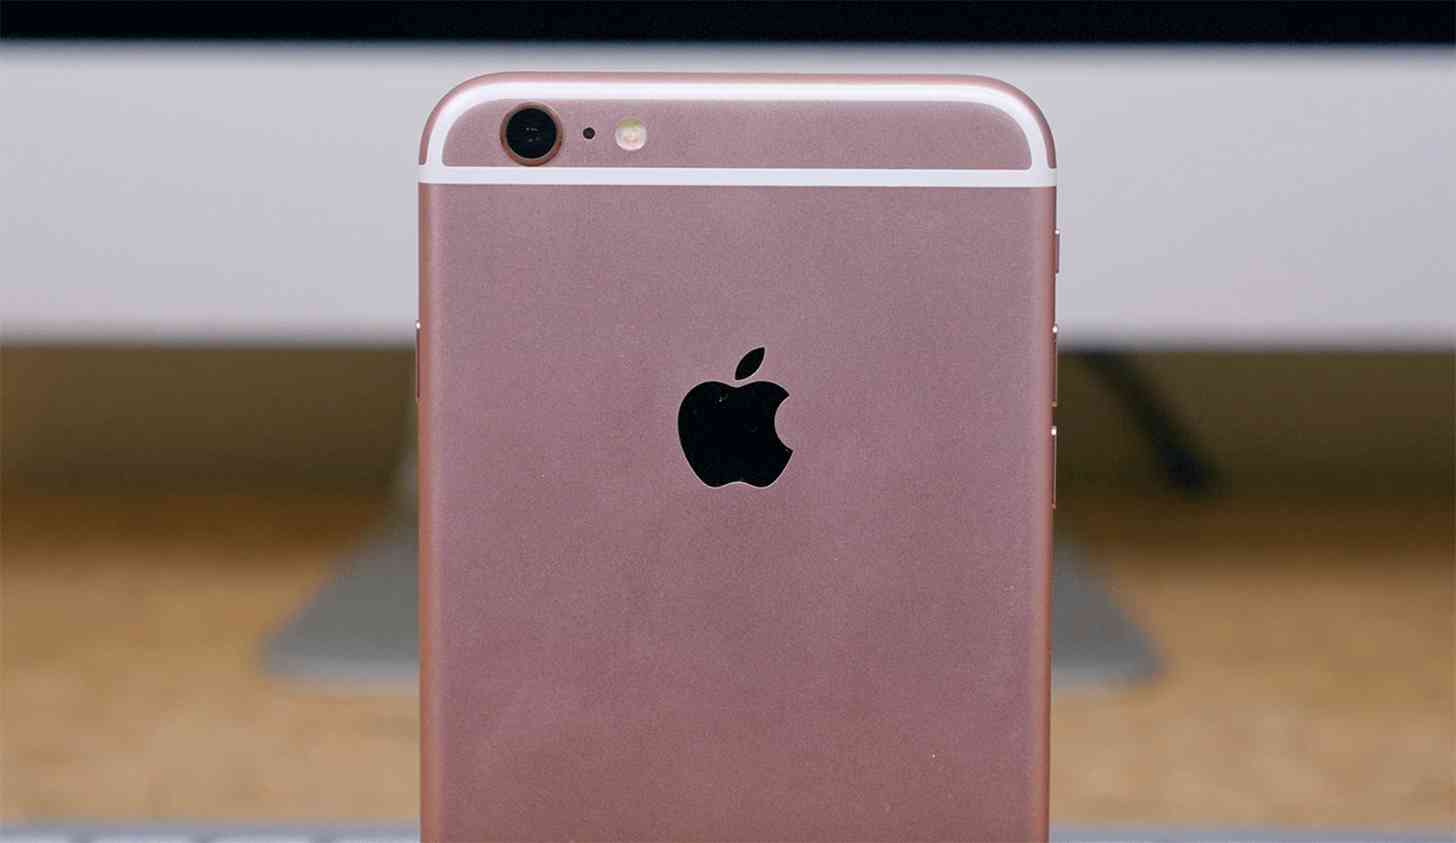 iPhone 6s Plus hands-on review